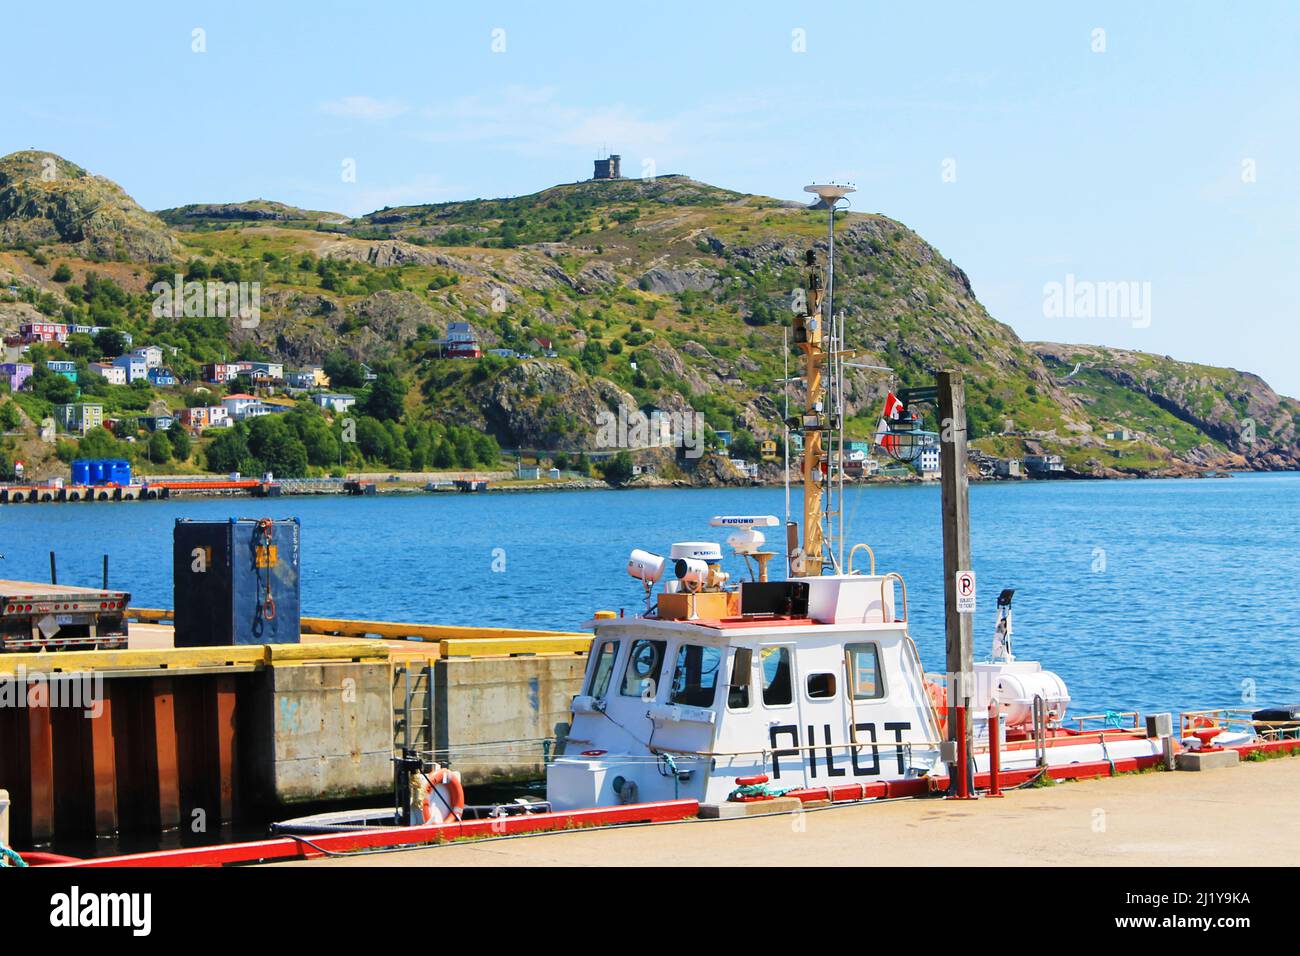 Pilot boat docked at a pier, St. John's Harbour. Signal Hill and Cabot Tower in background. Stock Photo